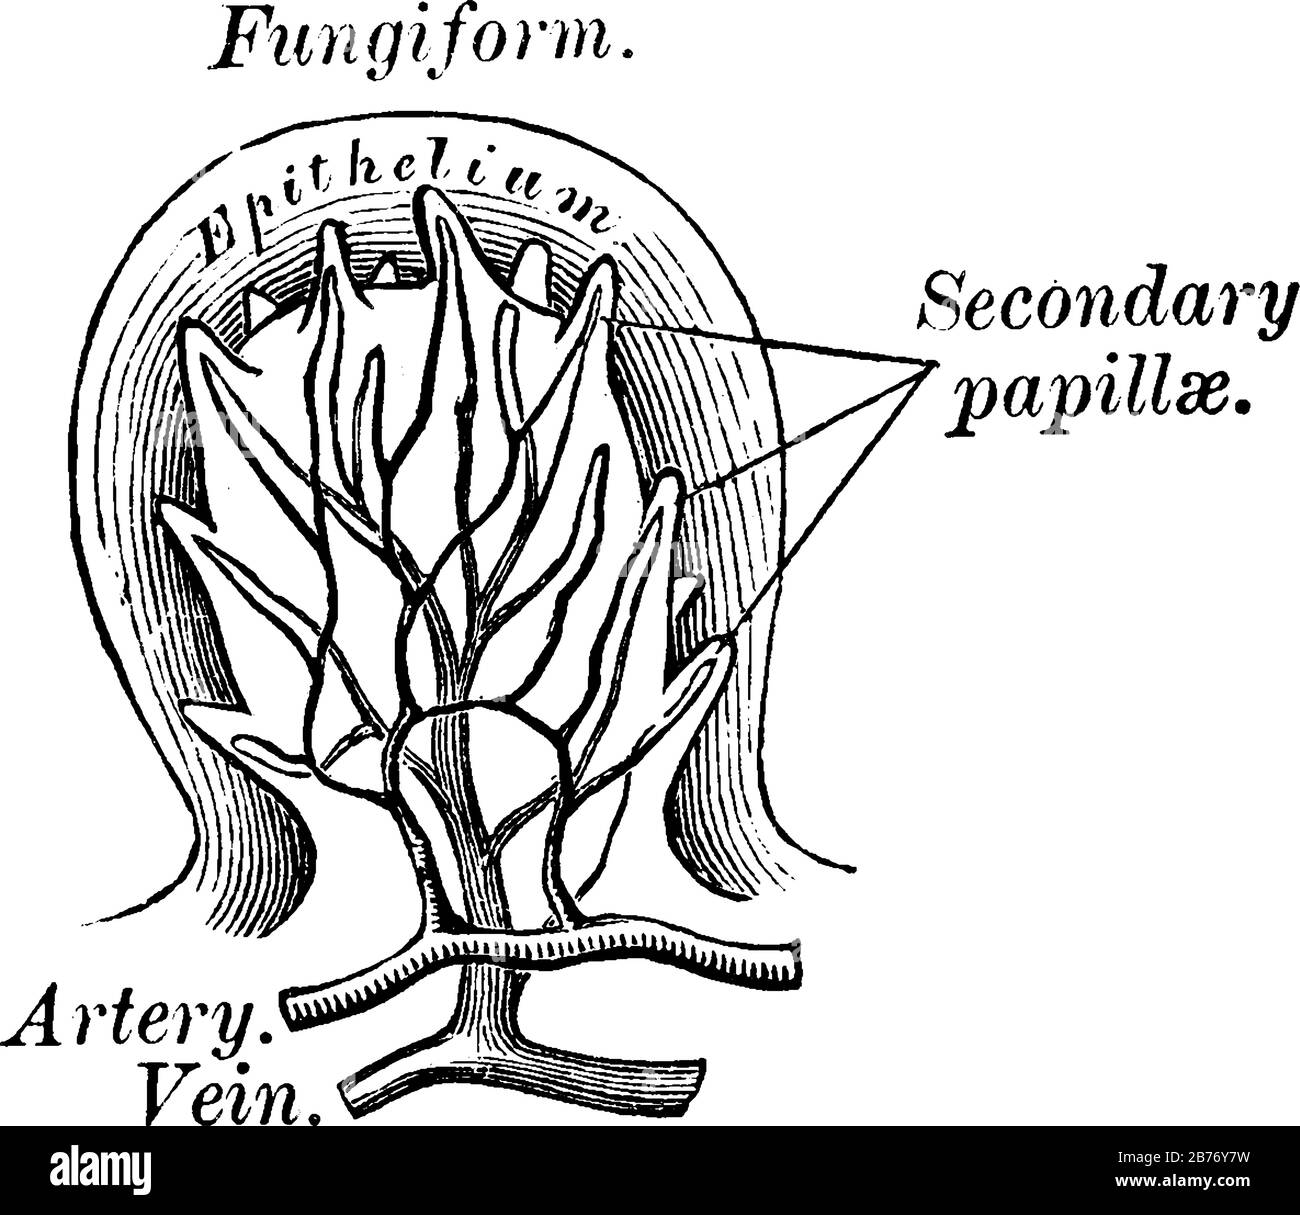 Fungiform Papillae are mushroom like and are highly vascularized papillae covering most of the dorsum of the tongue, vintage line drawing or engraving Stock Vector